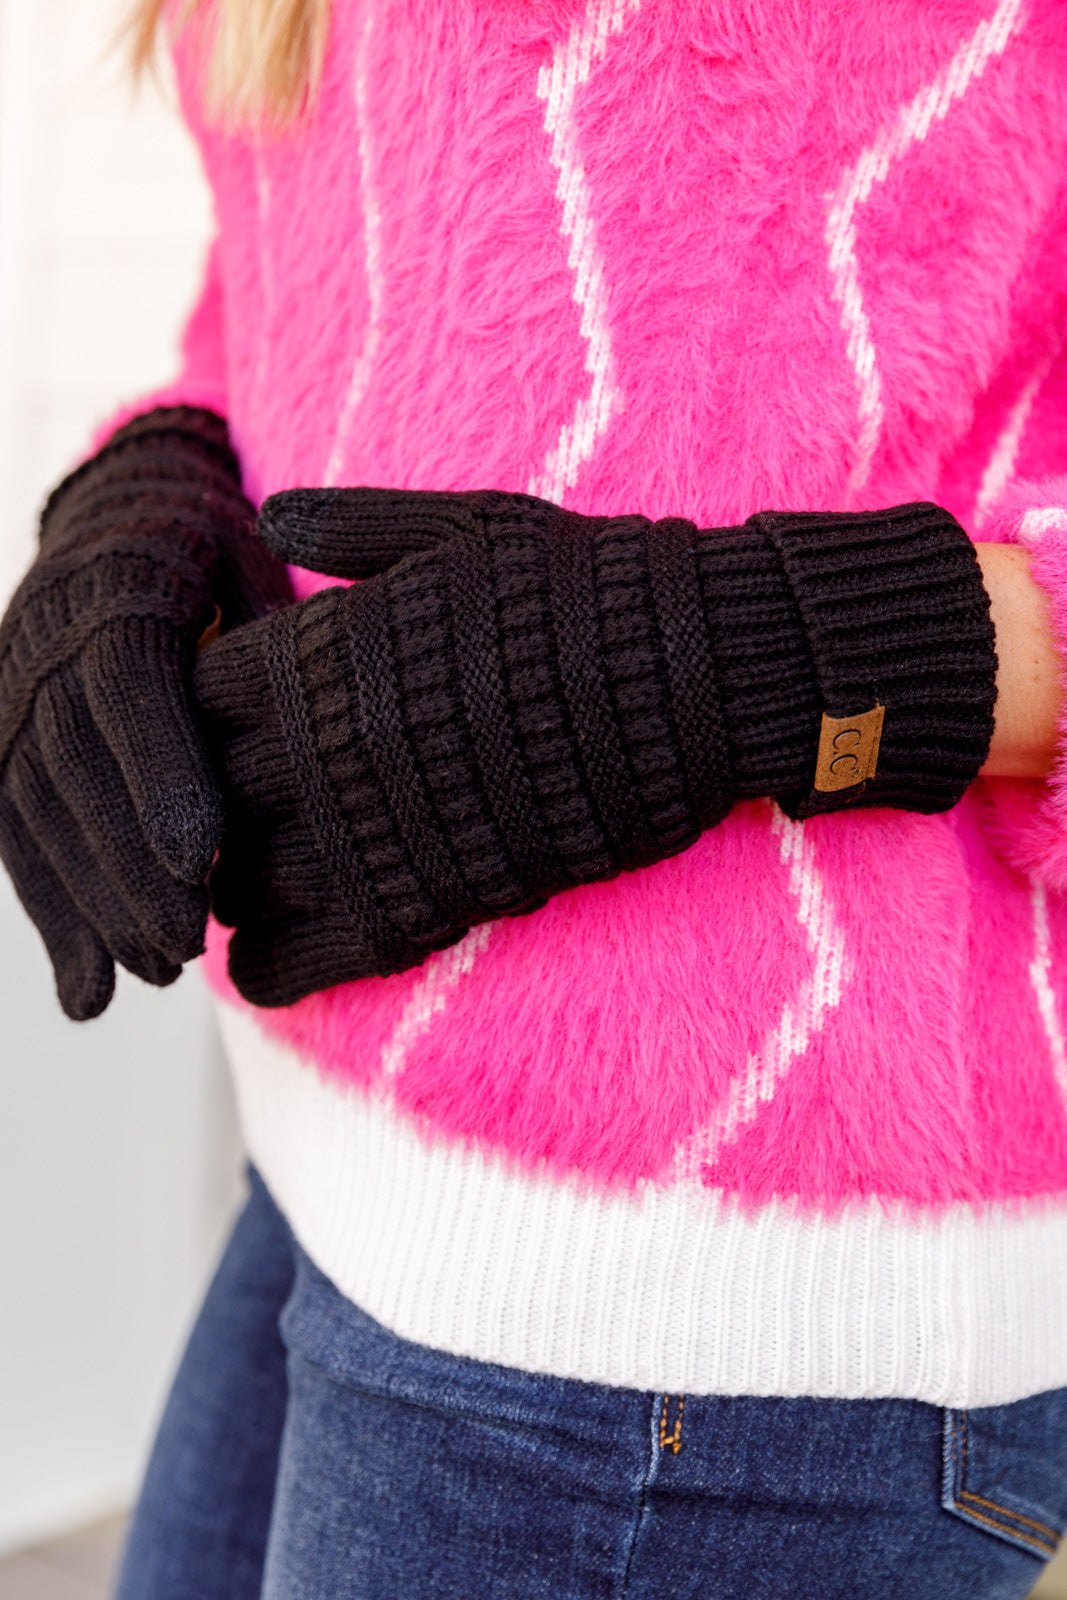 Got You Covered Knit Gloves In Black